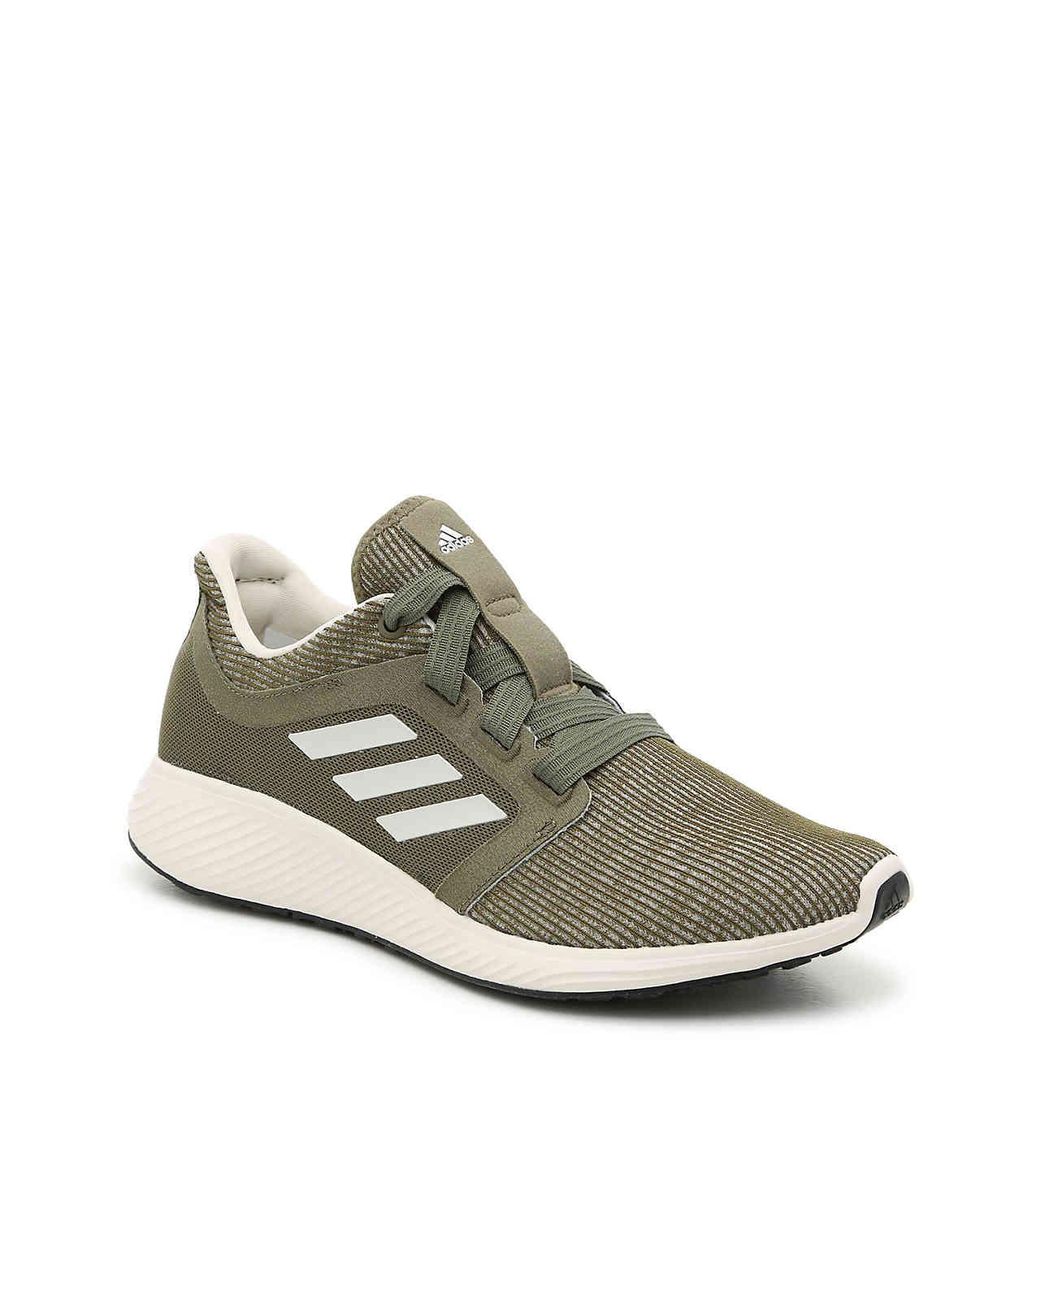 adidas Rubber Edge Lux 3 Lightweight Running Shoe in Olive Green (Green) |  Lyst